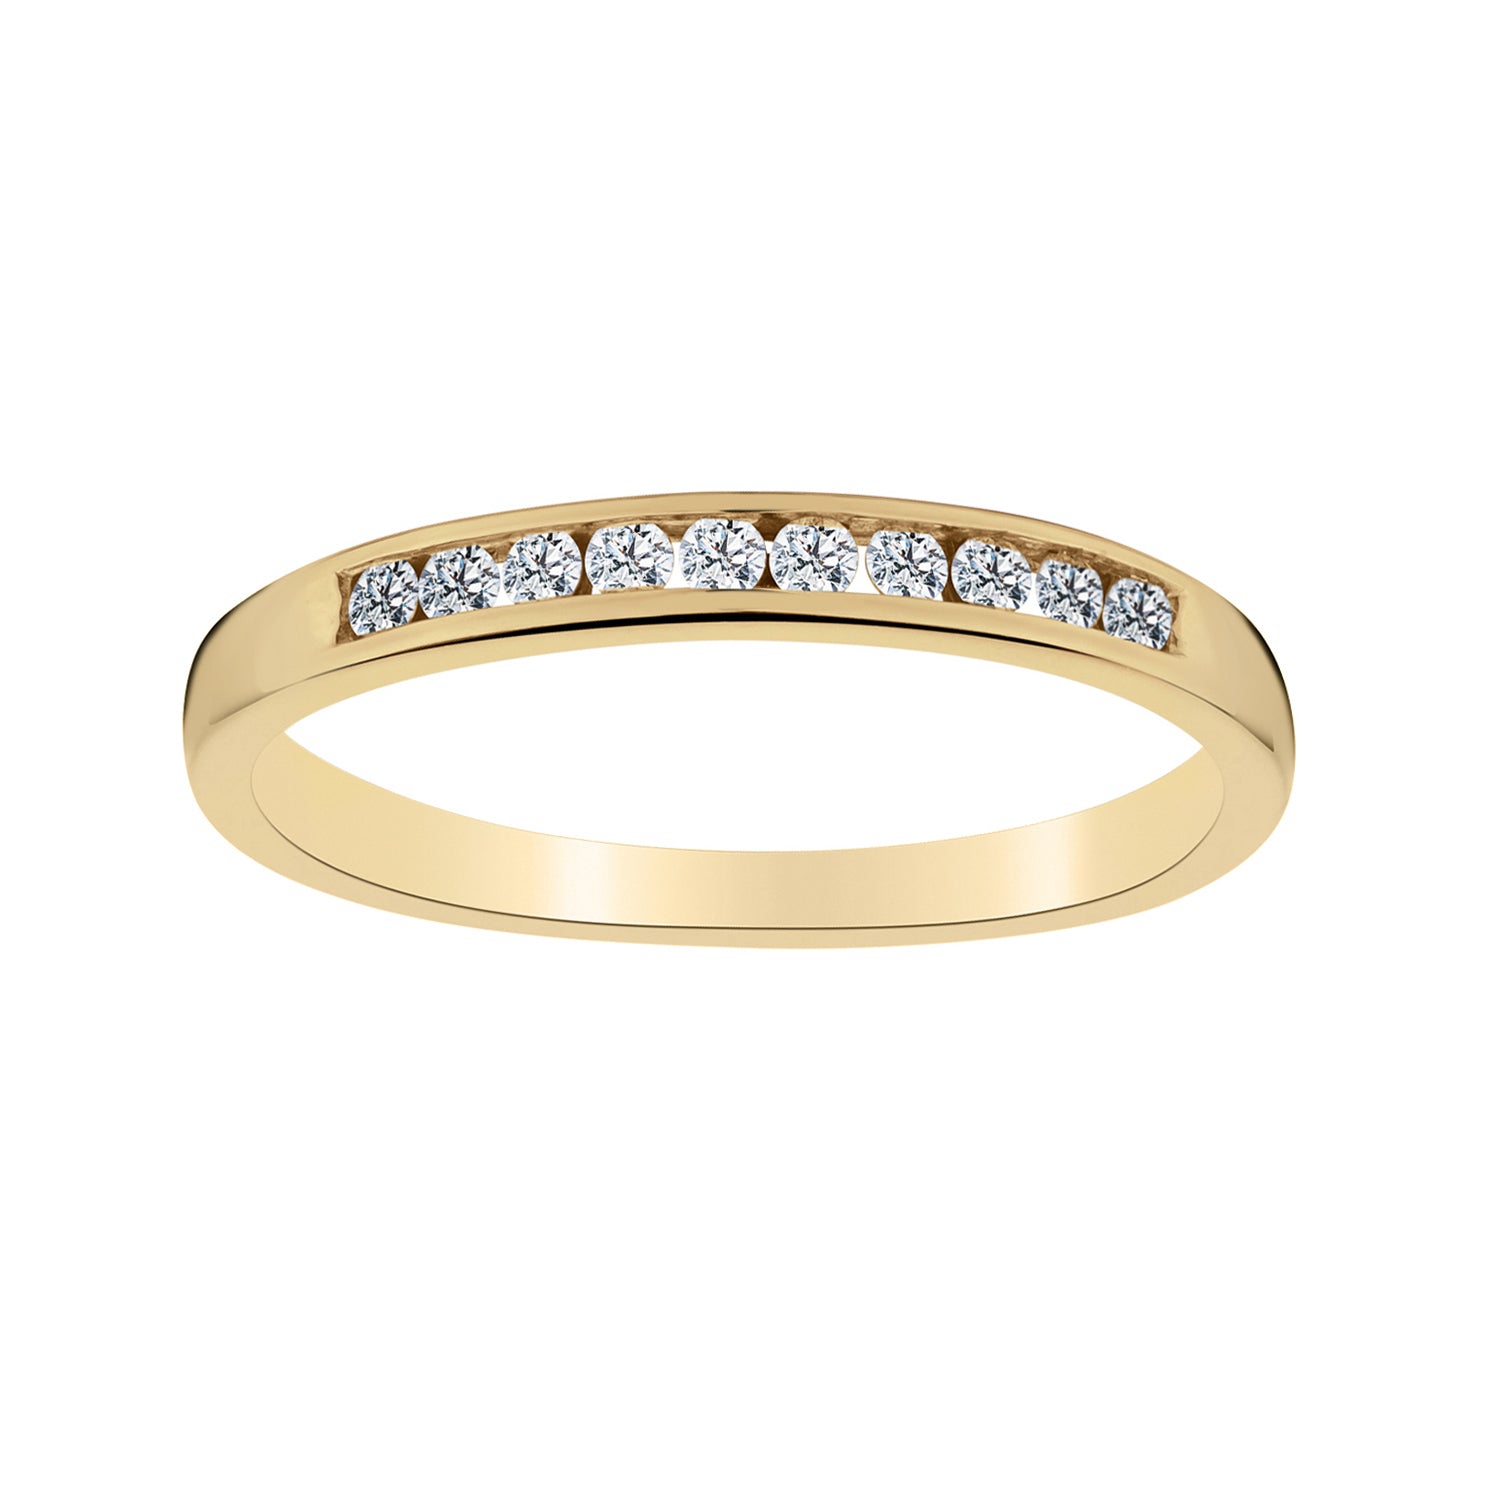 .15 Carat of Diamonds Band Ring, 10kt Yellow Gold…...................NOW